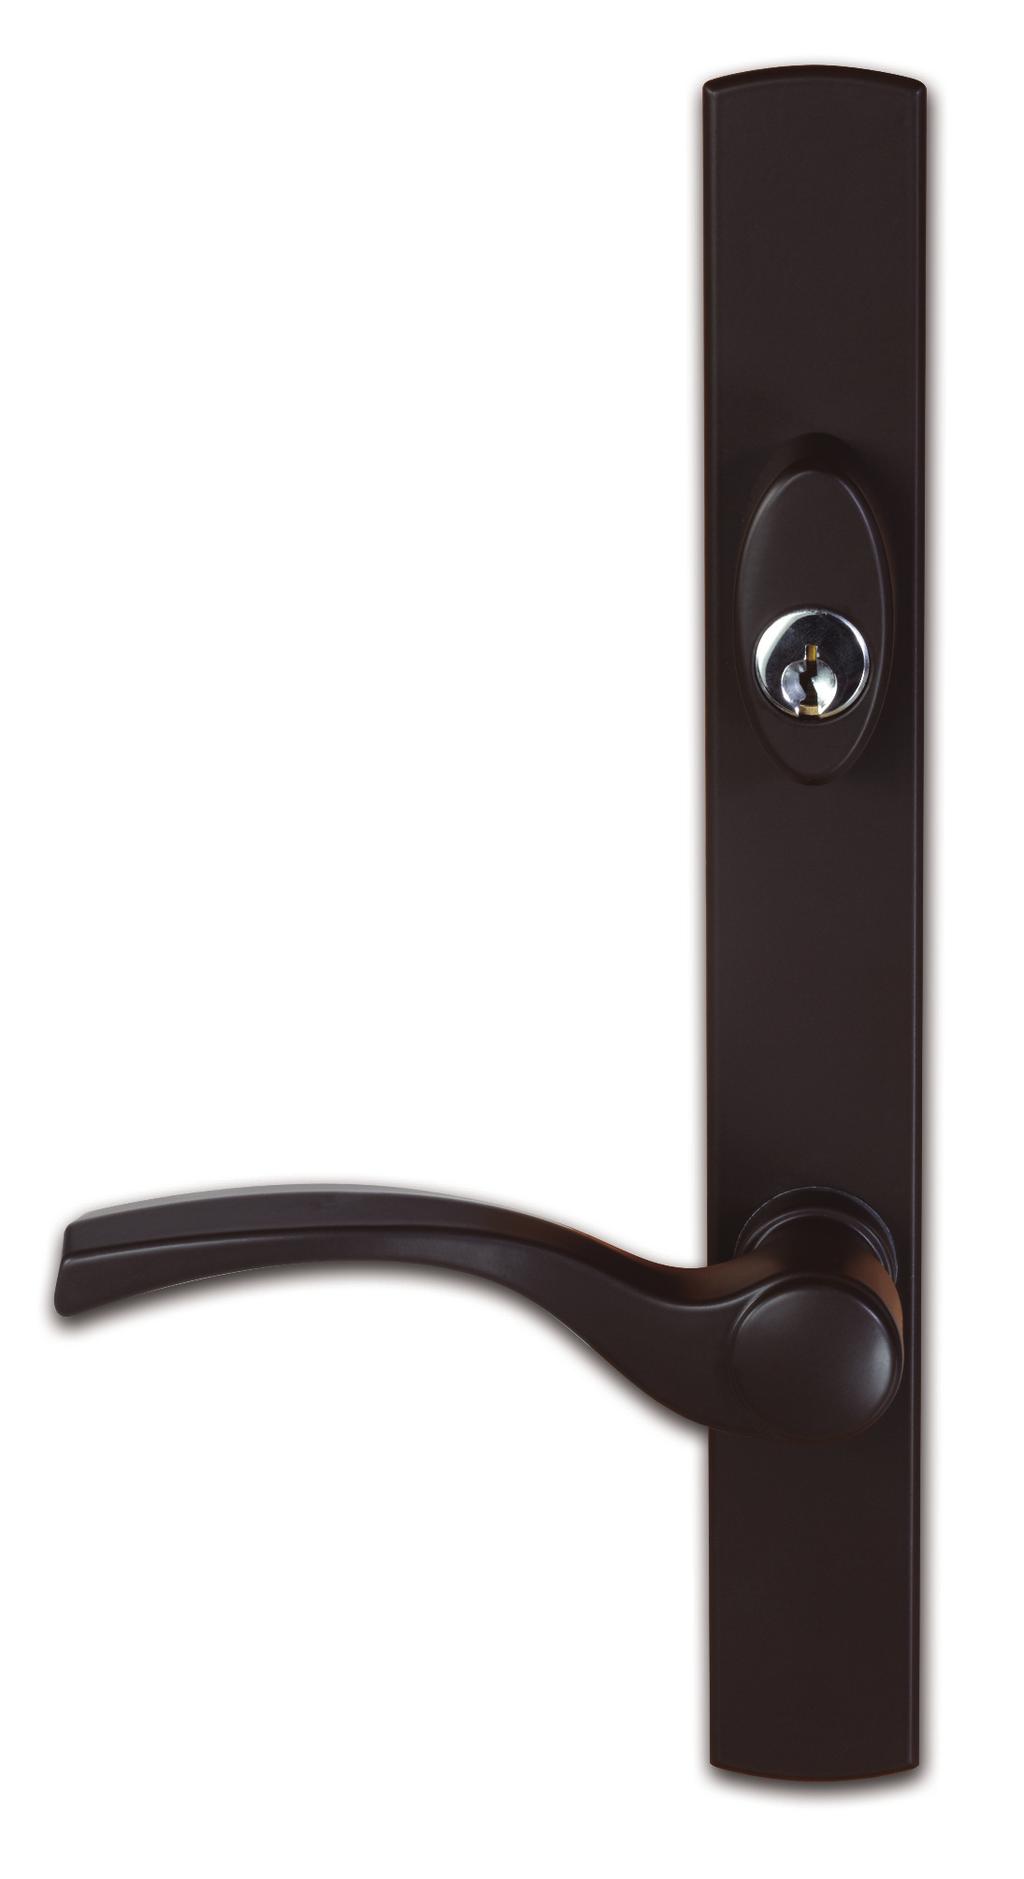 Multiple handle choices available North American 90 degree thumbturn located above the handle Stylish and